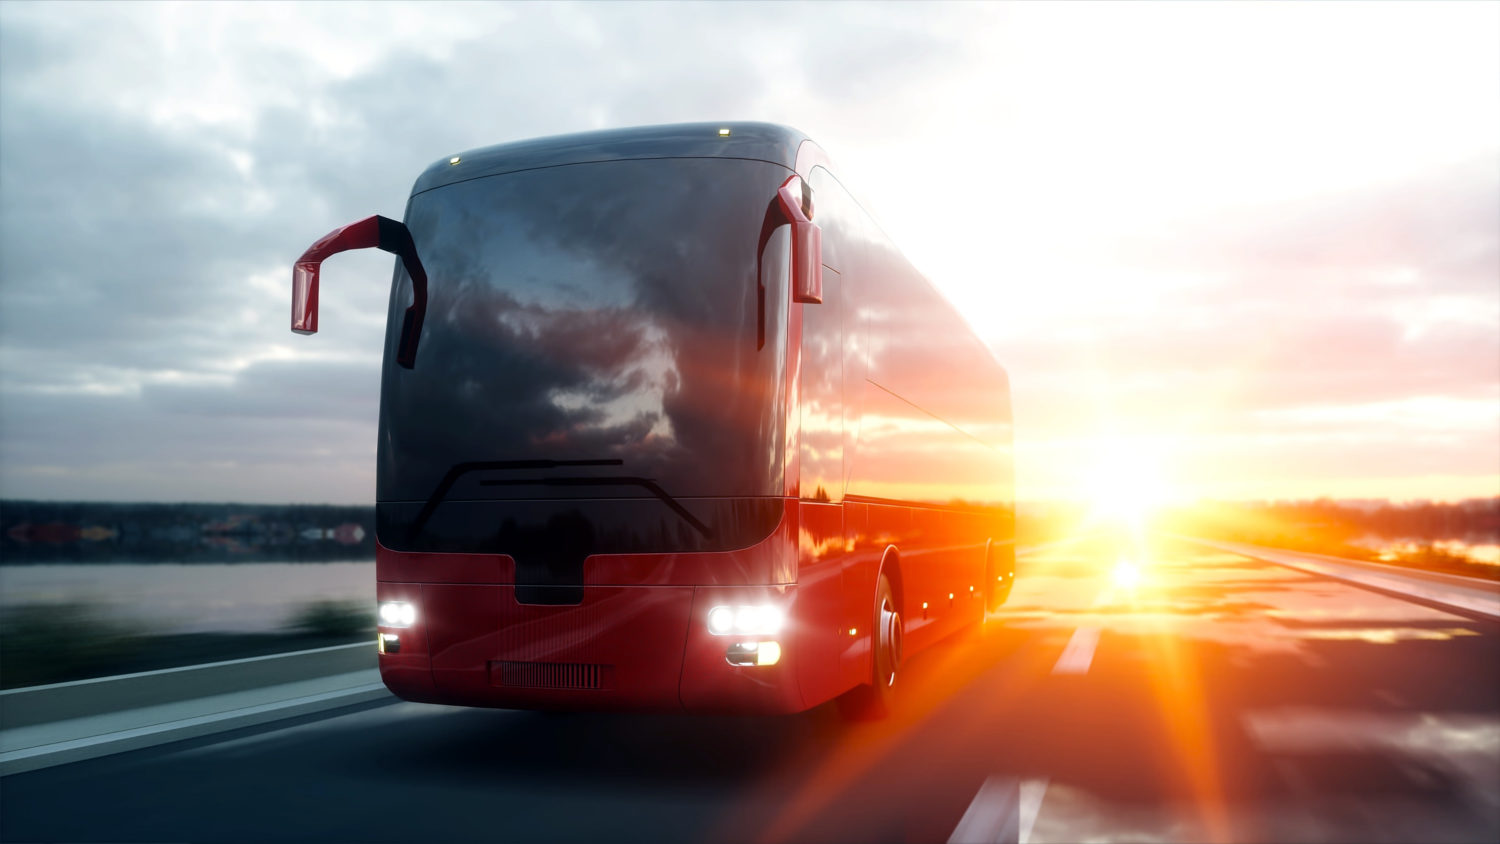 Red bus driving on a road with sunset behind it 